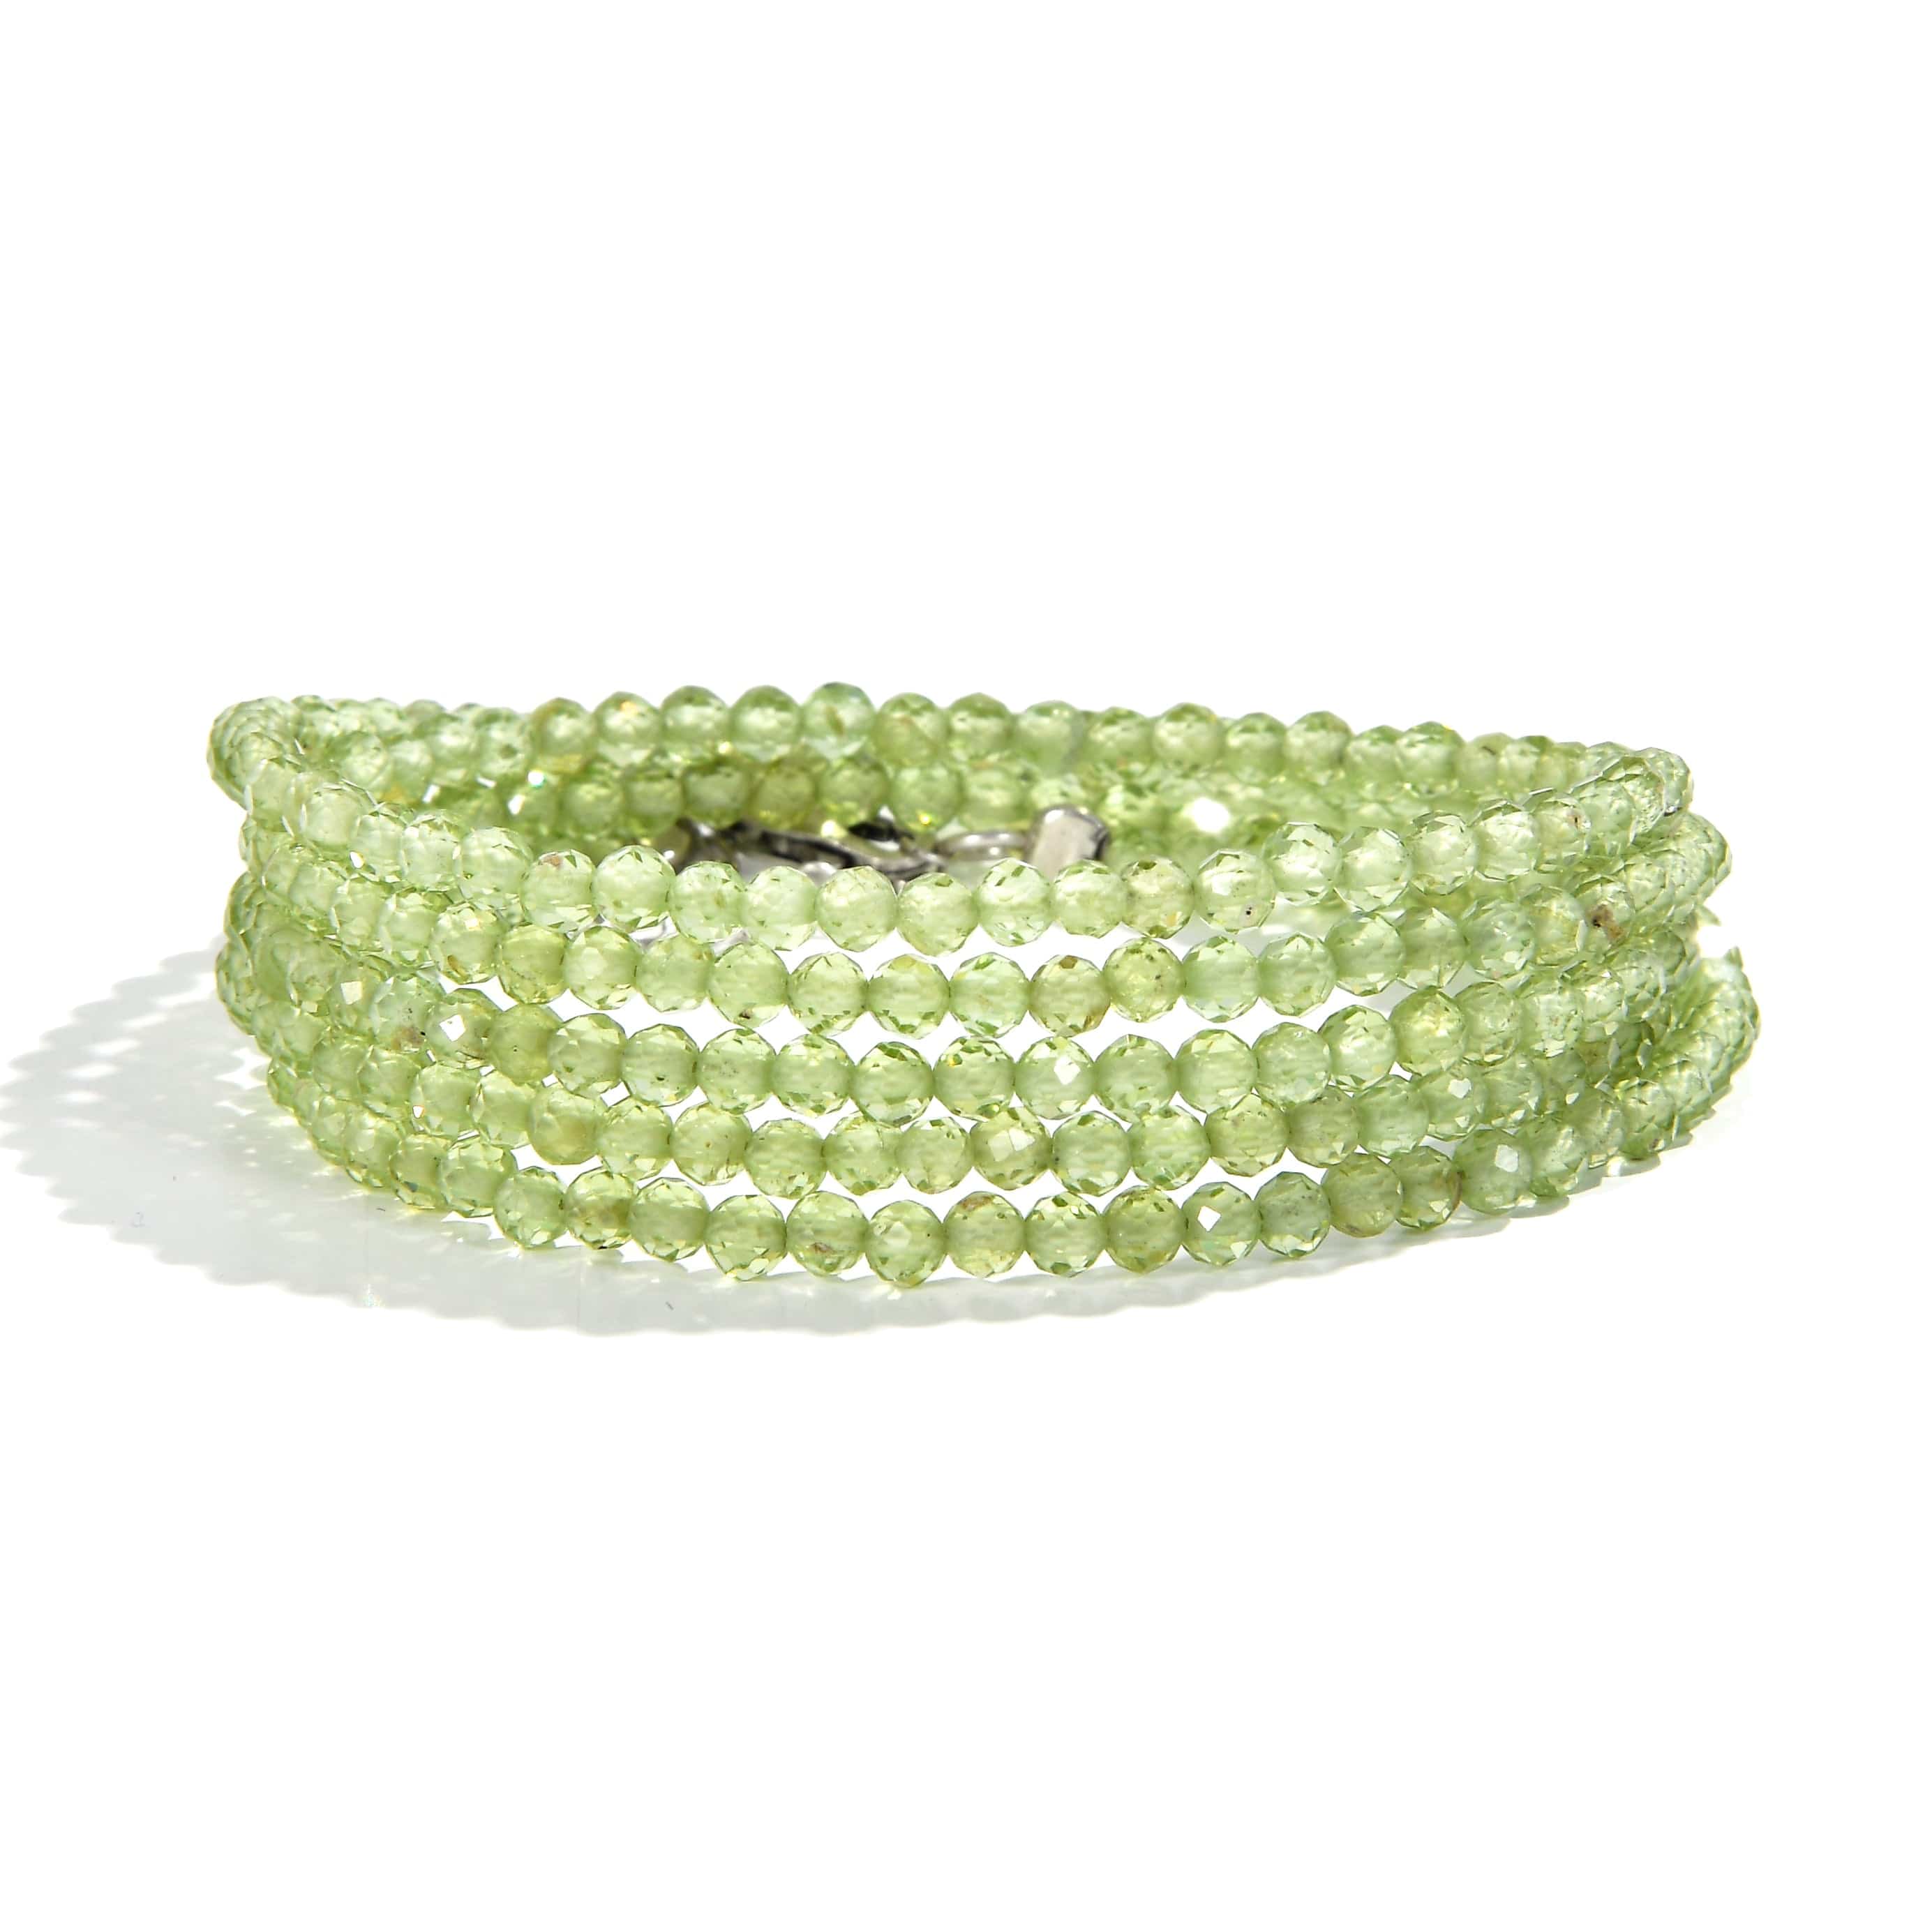 KALIFANO Gemstone Jewelry 3mm Peridot Faceted 31" Necklace / Multi Wrap Bracelet N3-79S-PT